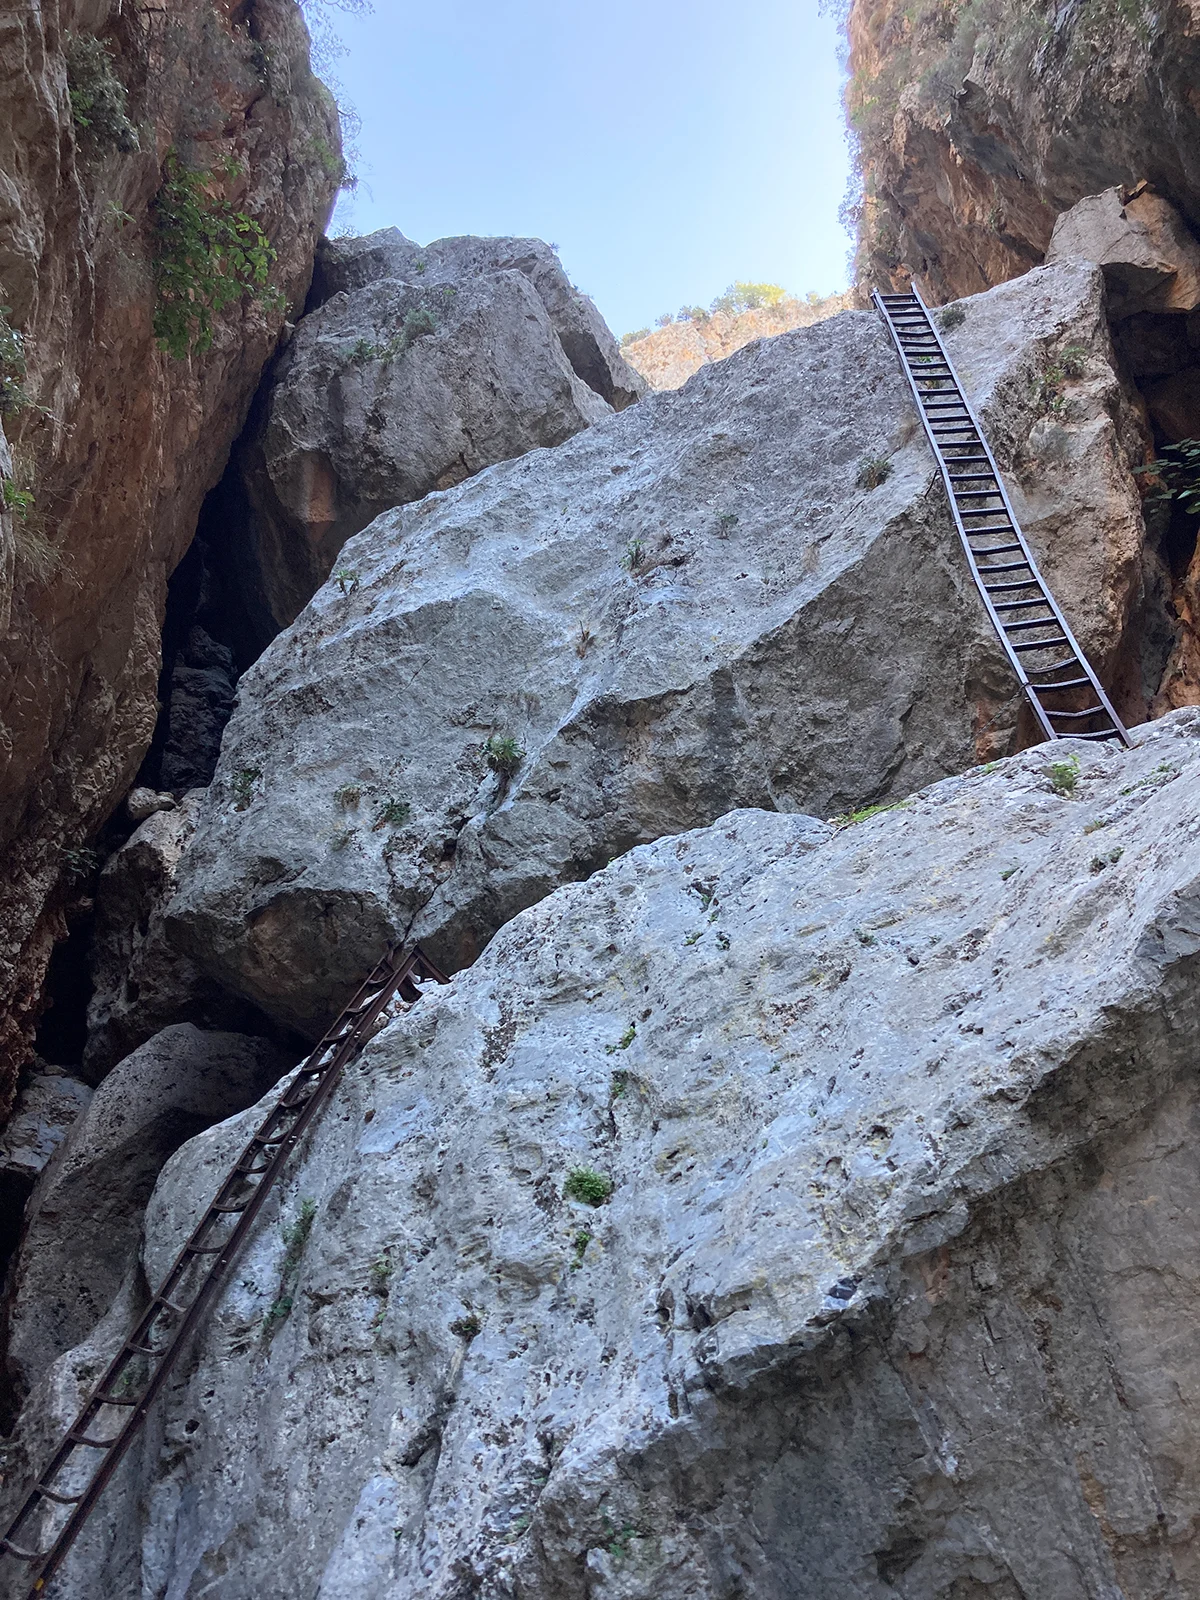 looking up at large boulders with ladders resting on them towards sky